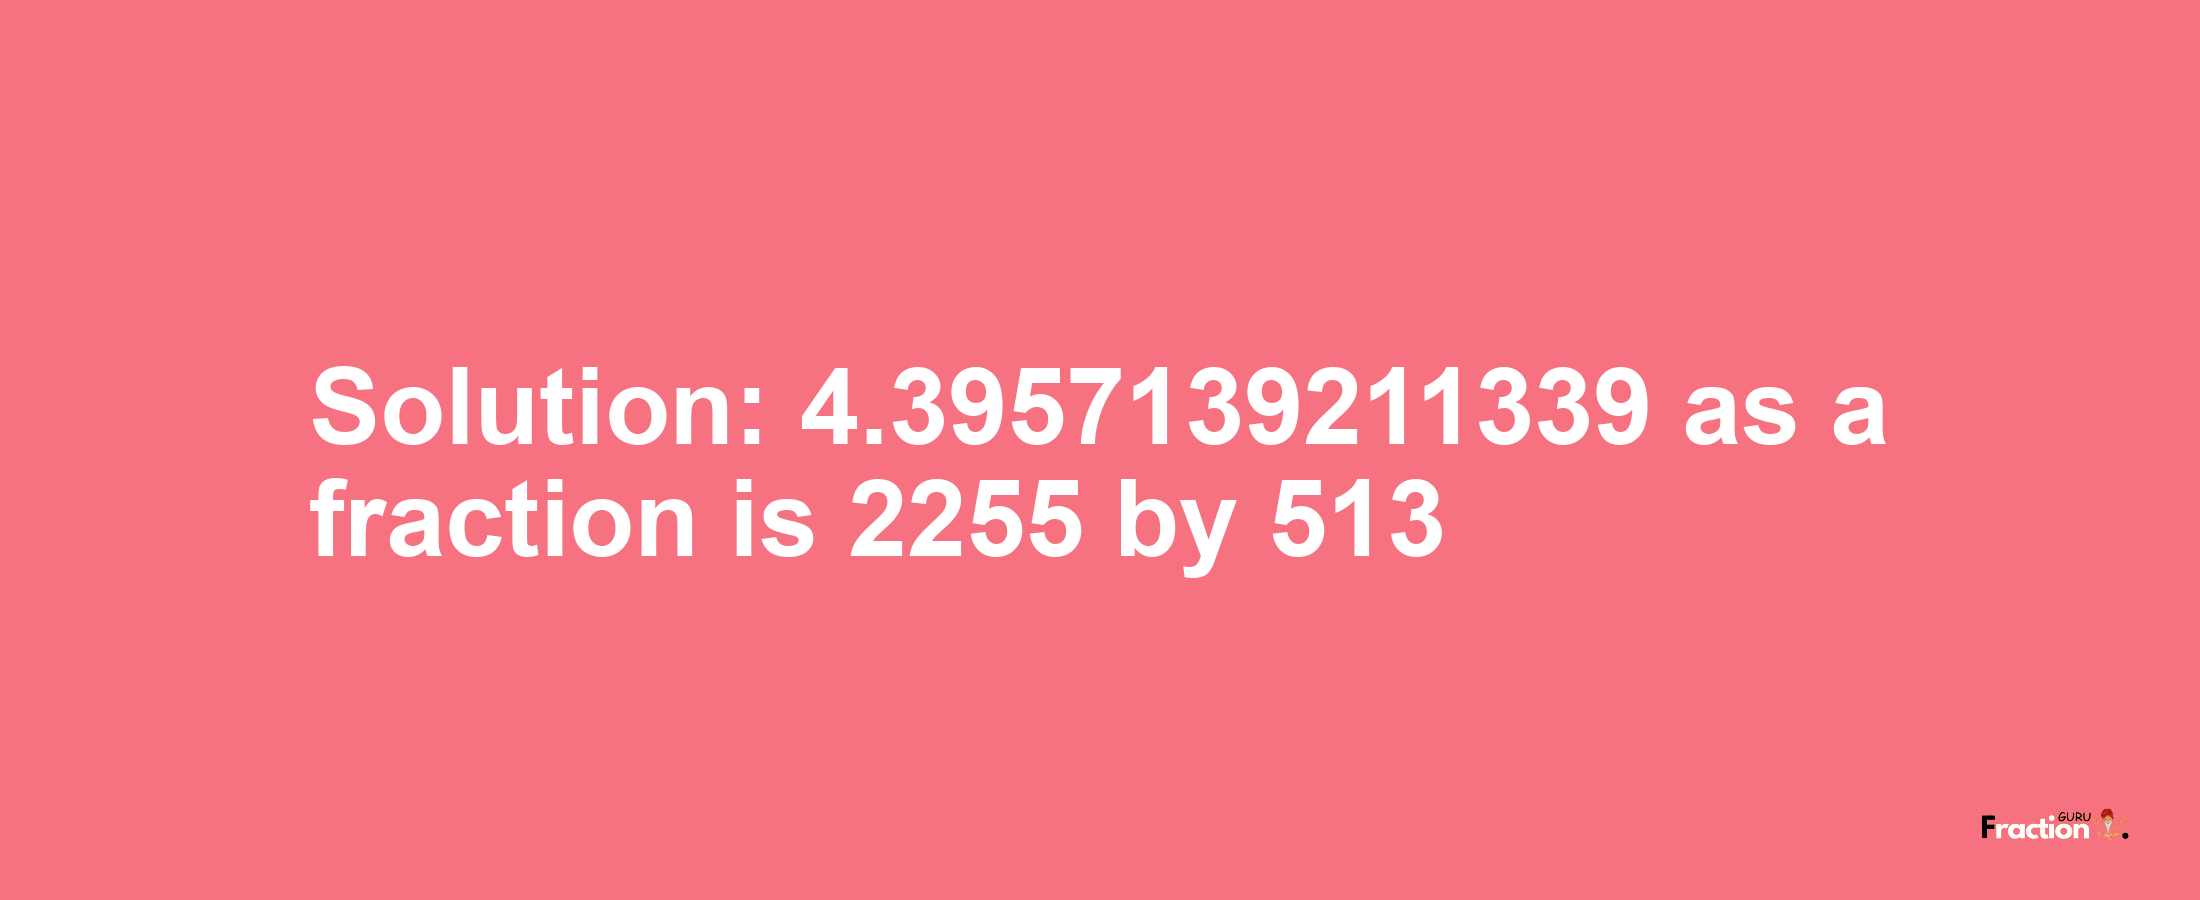 Solution:4.3957139211339 as a fraction is 2255/513